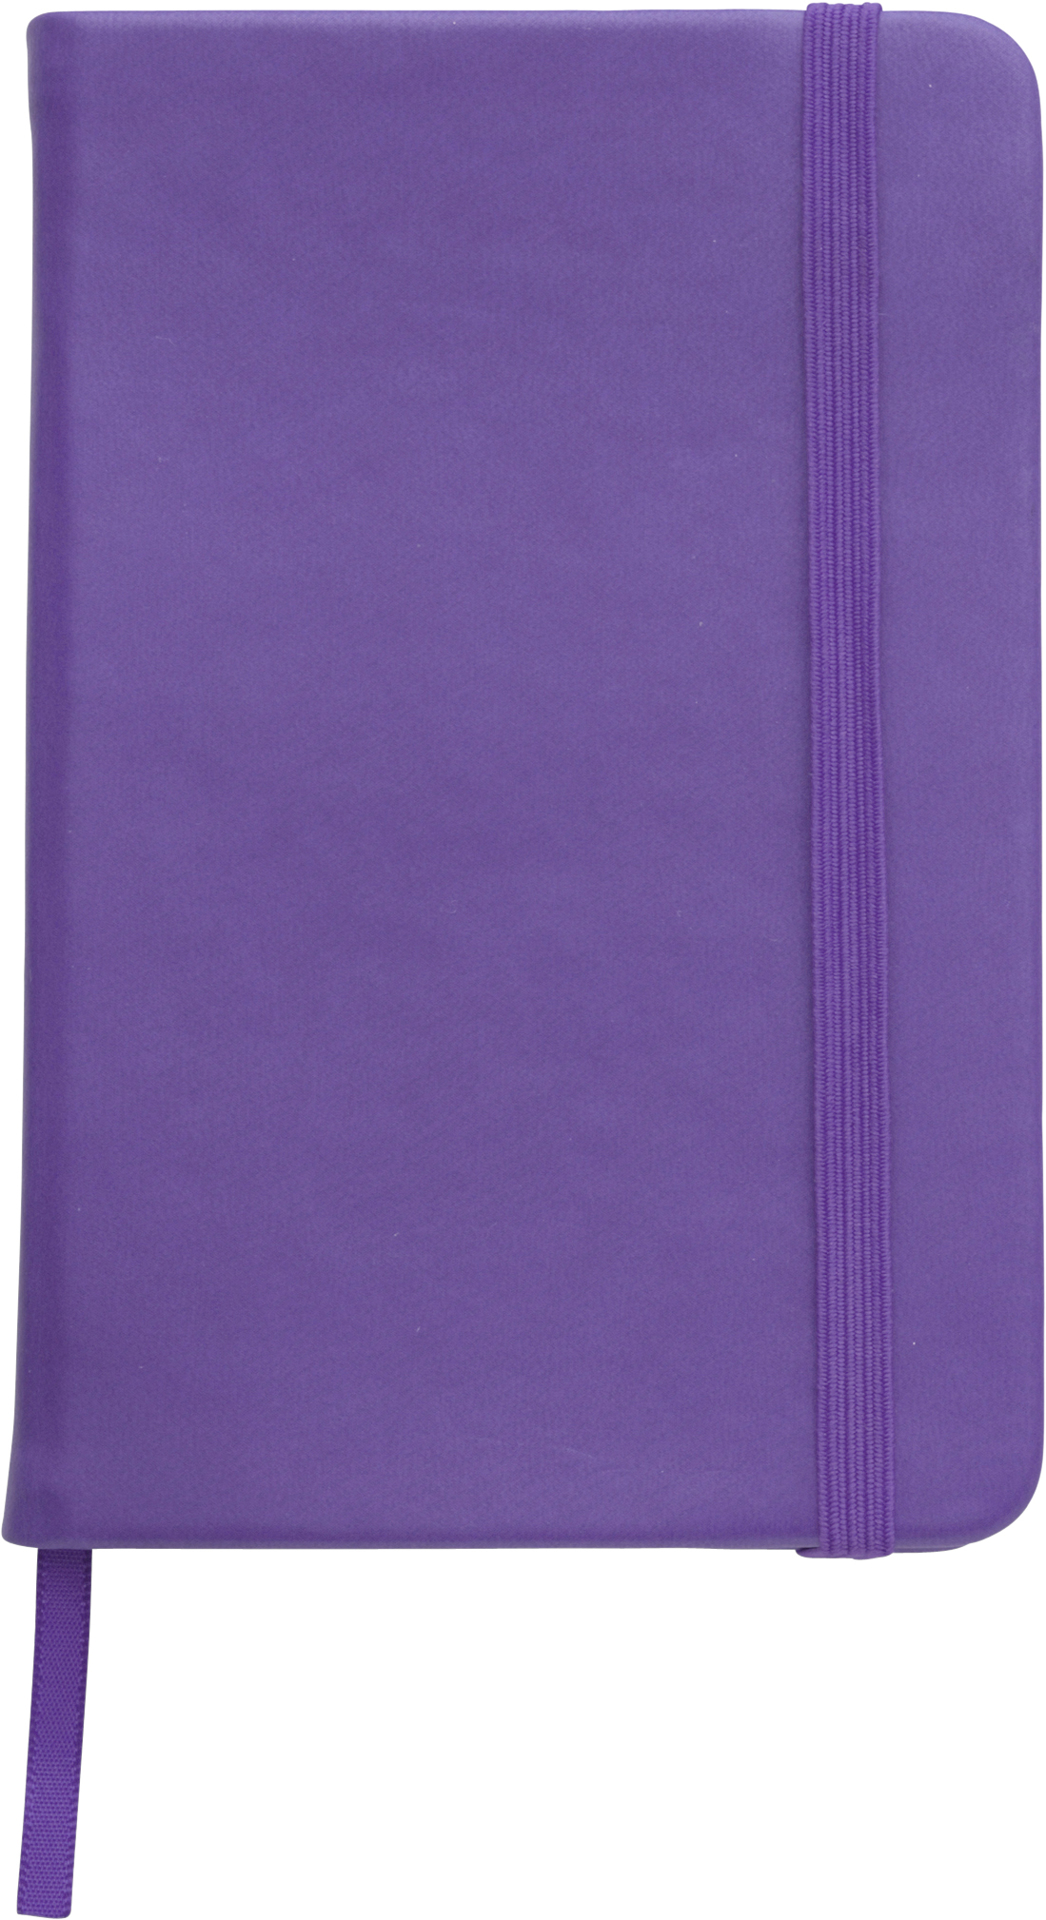 A6 Notebook with soft PU cover in purple